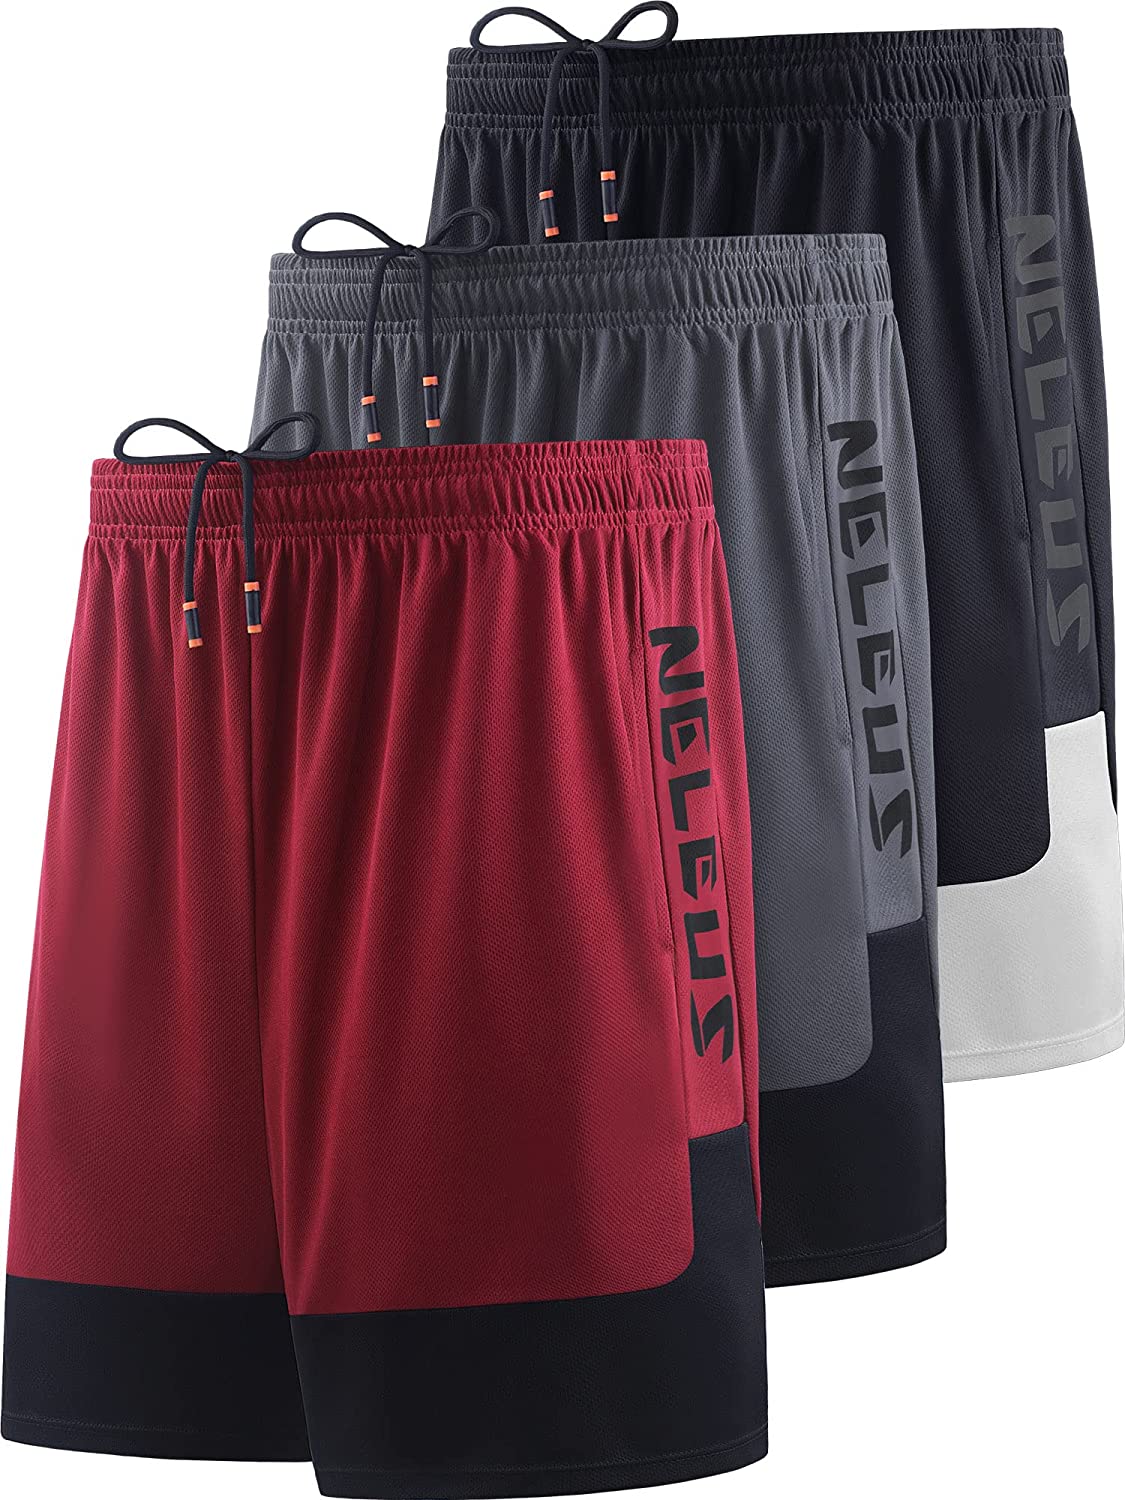 Neleus Men's Lightweight Workout Athletic Shorts with Pockets 